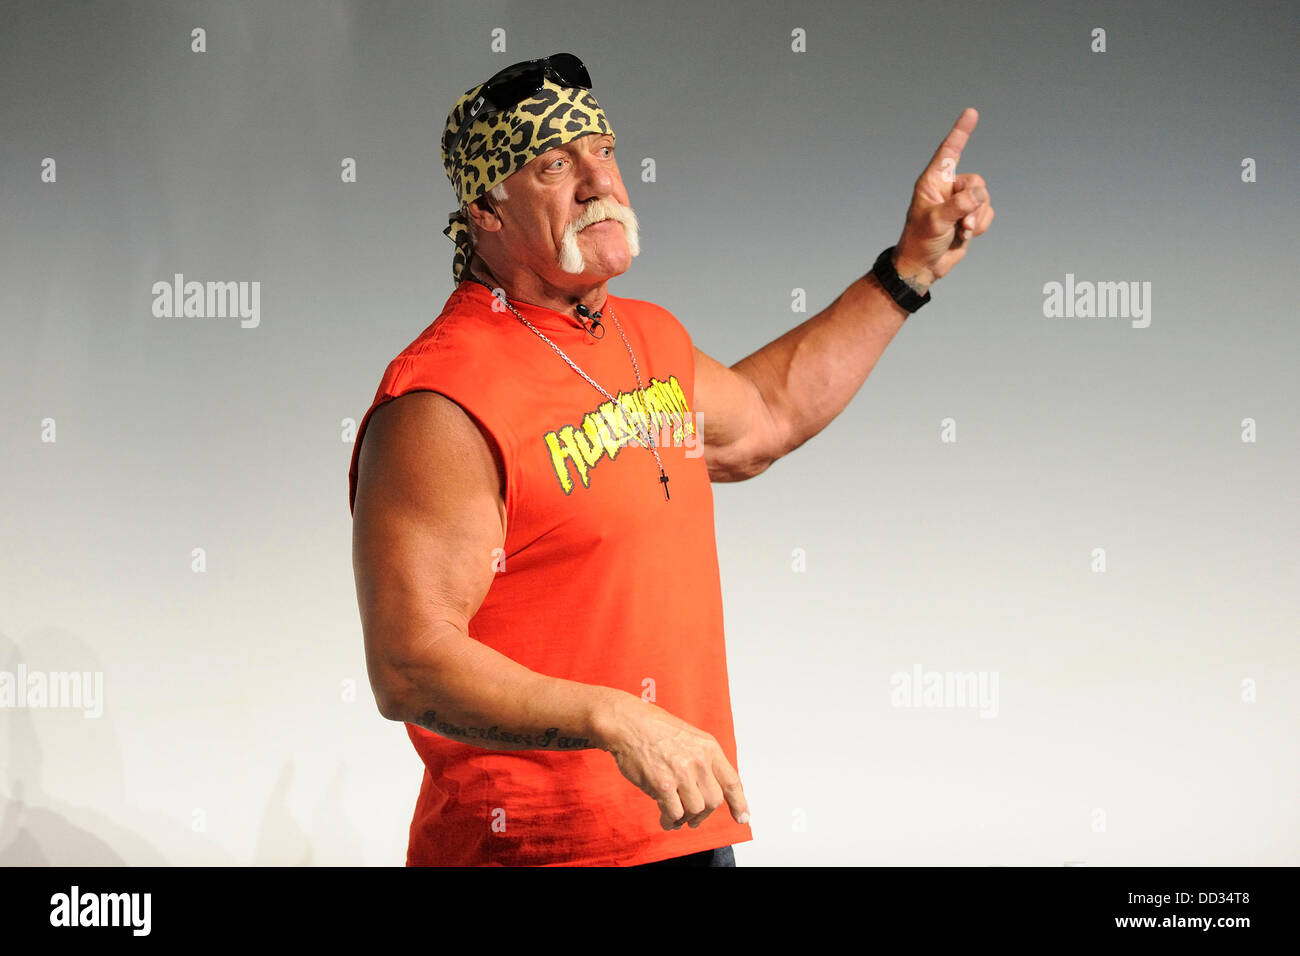 Chat with Hulk Hogan at 1 p.m. Wednesday - Page 2 - ESPN